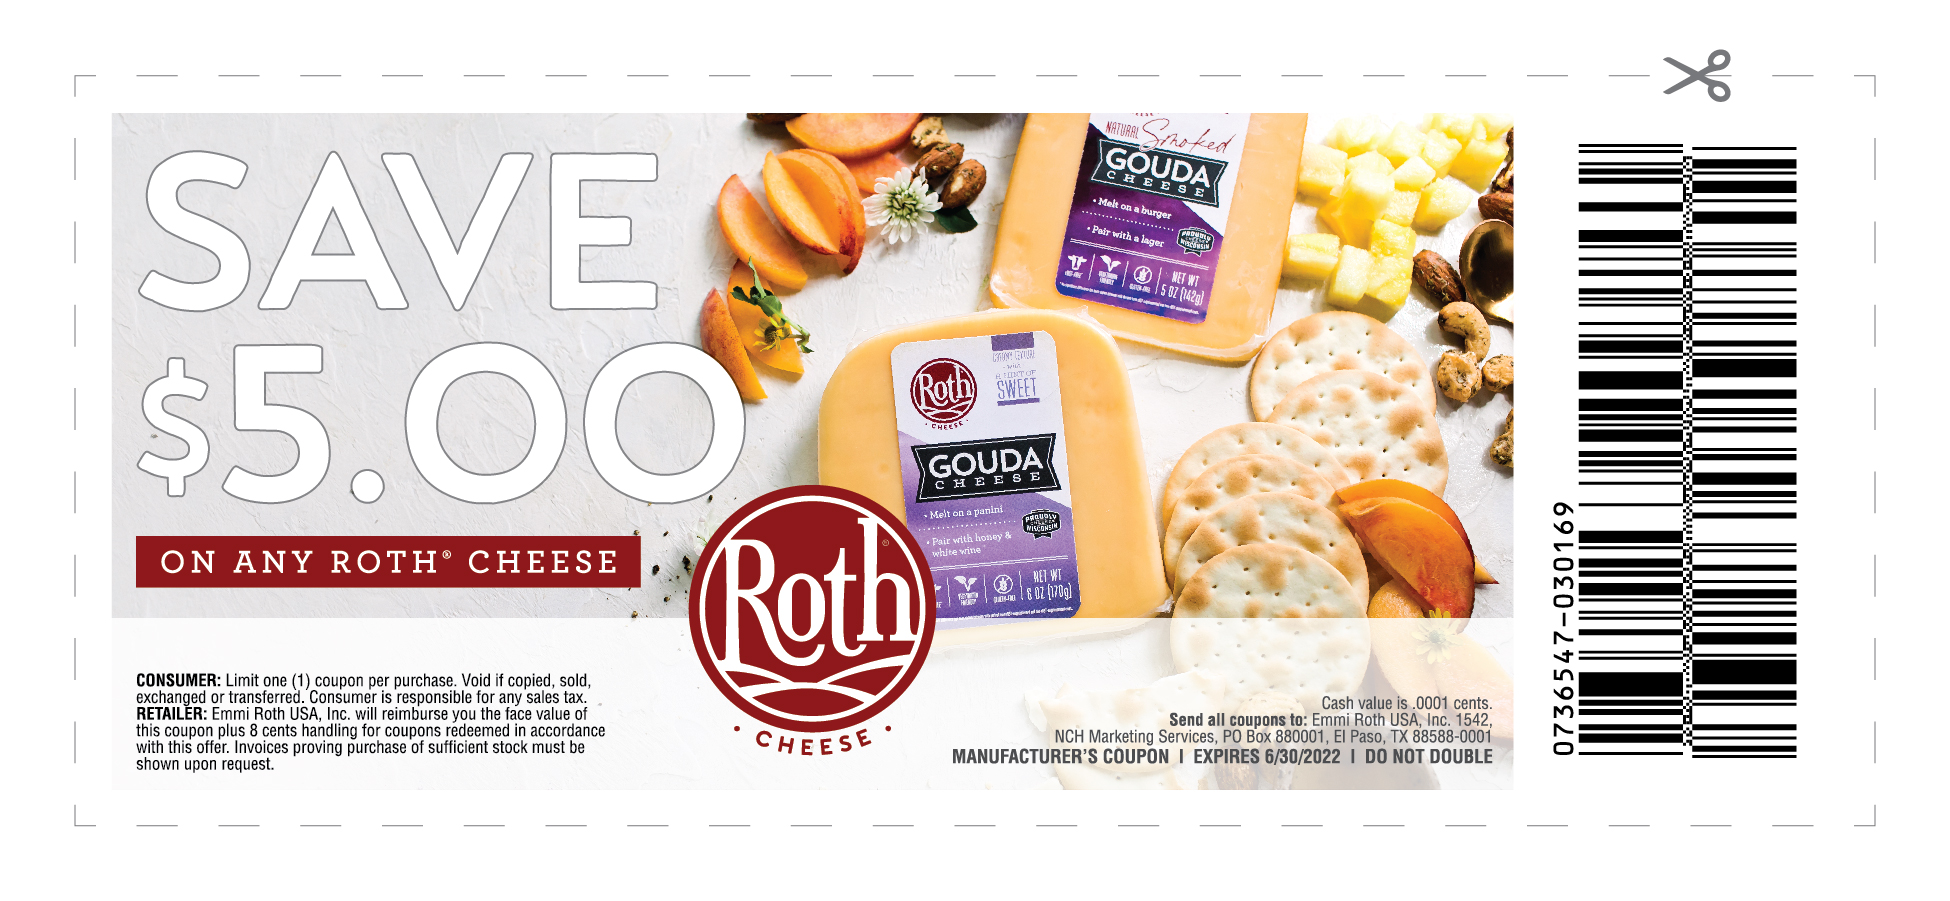 Roth Cheese Coupons Roth Cheese